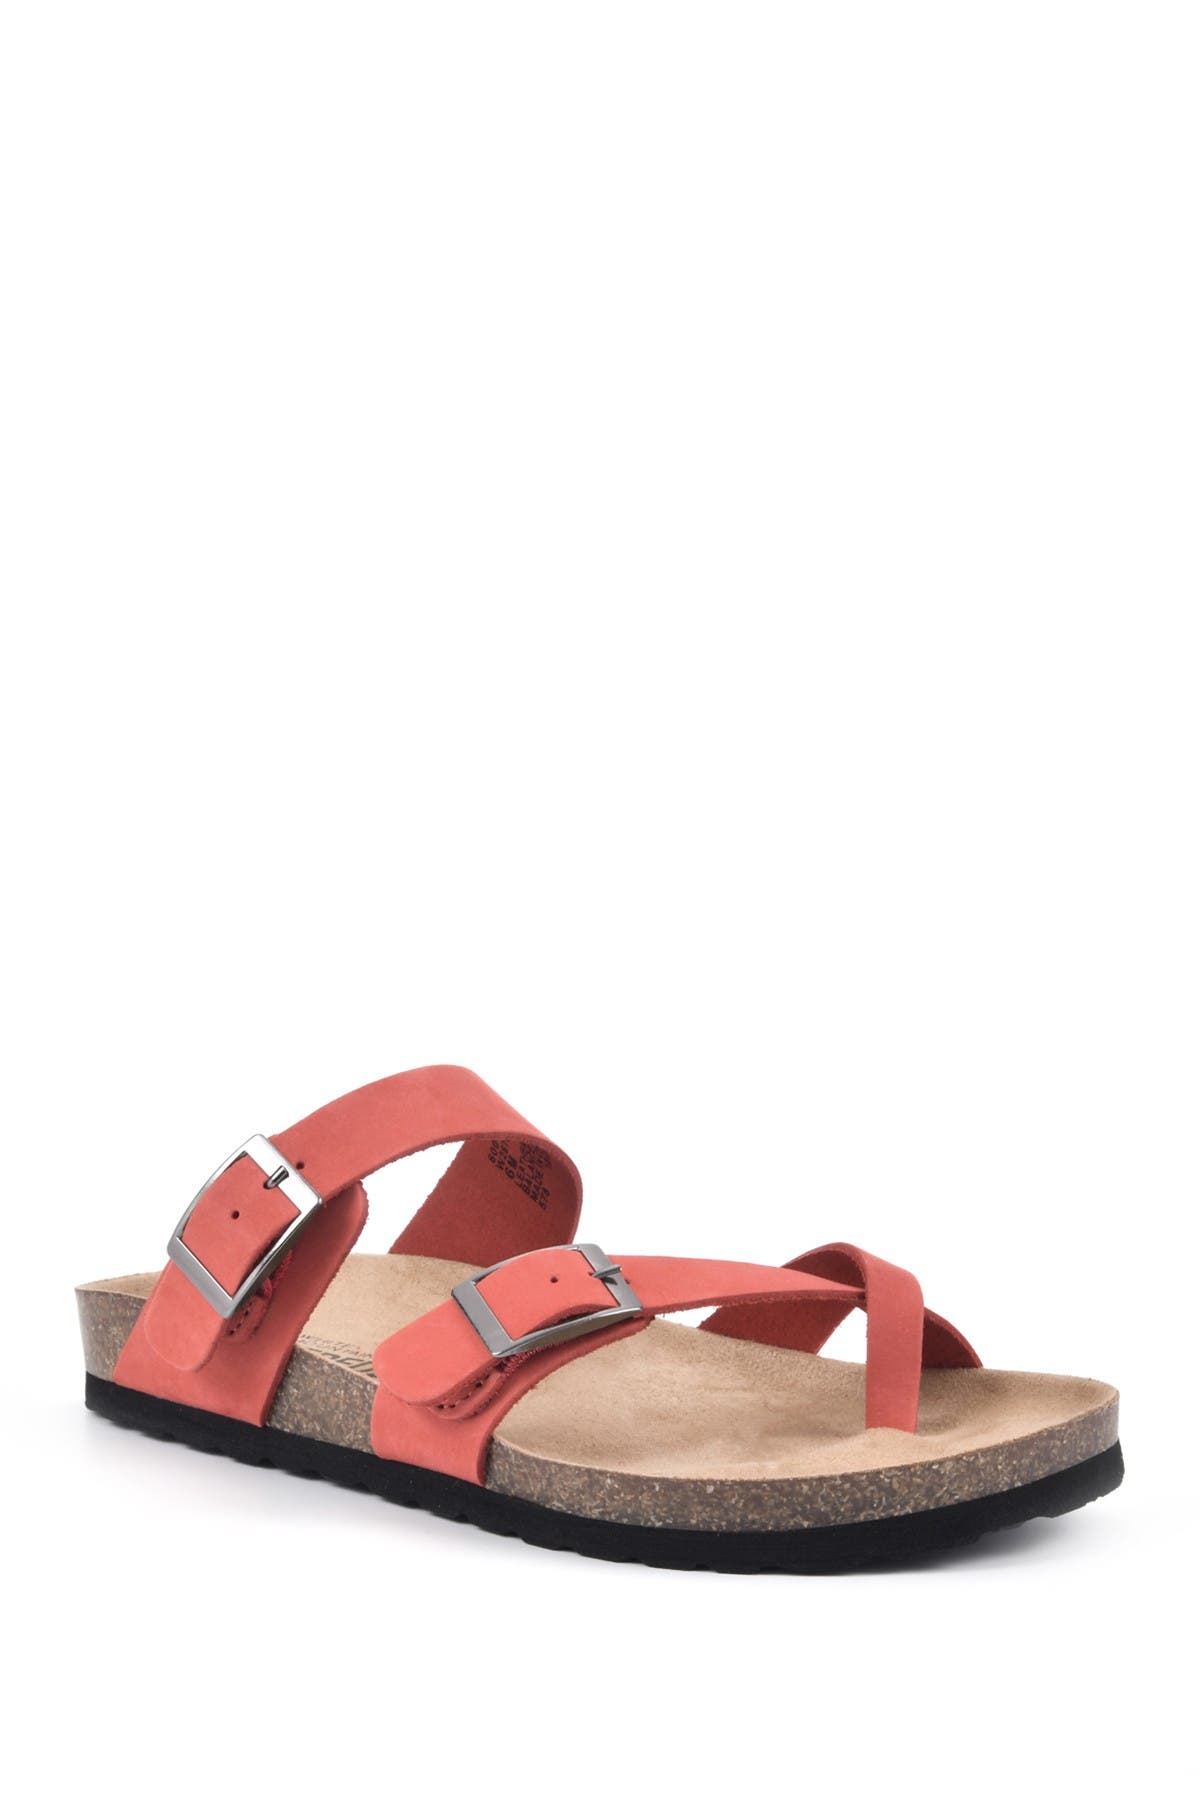 White Mountain Footwear Gracie Double Buckle Sandal In Red/leather